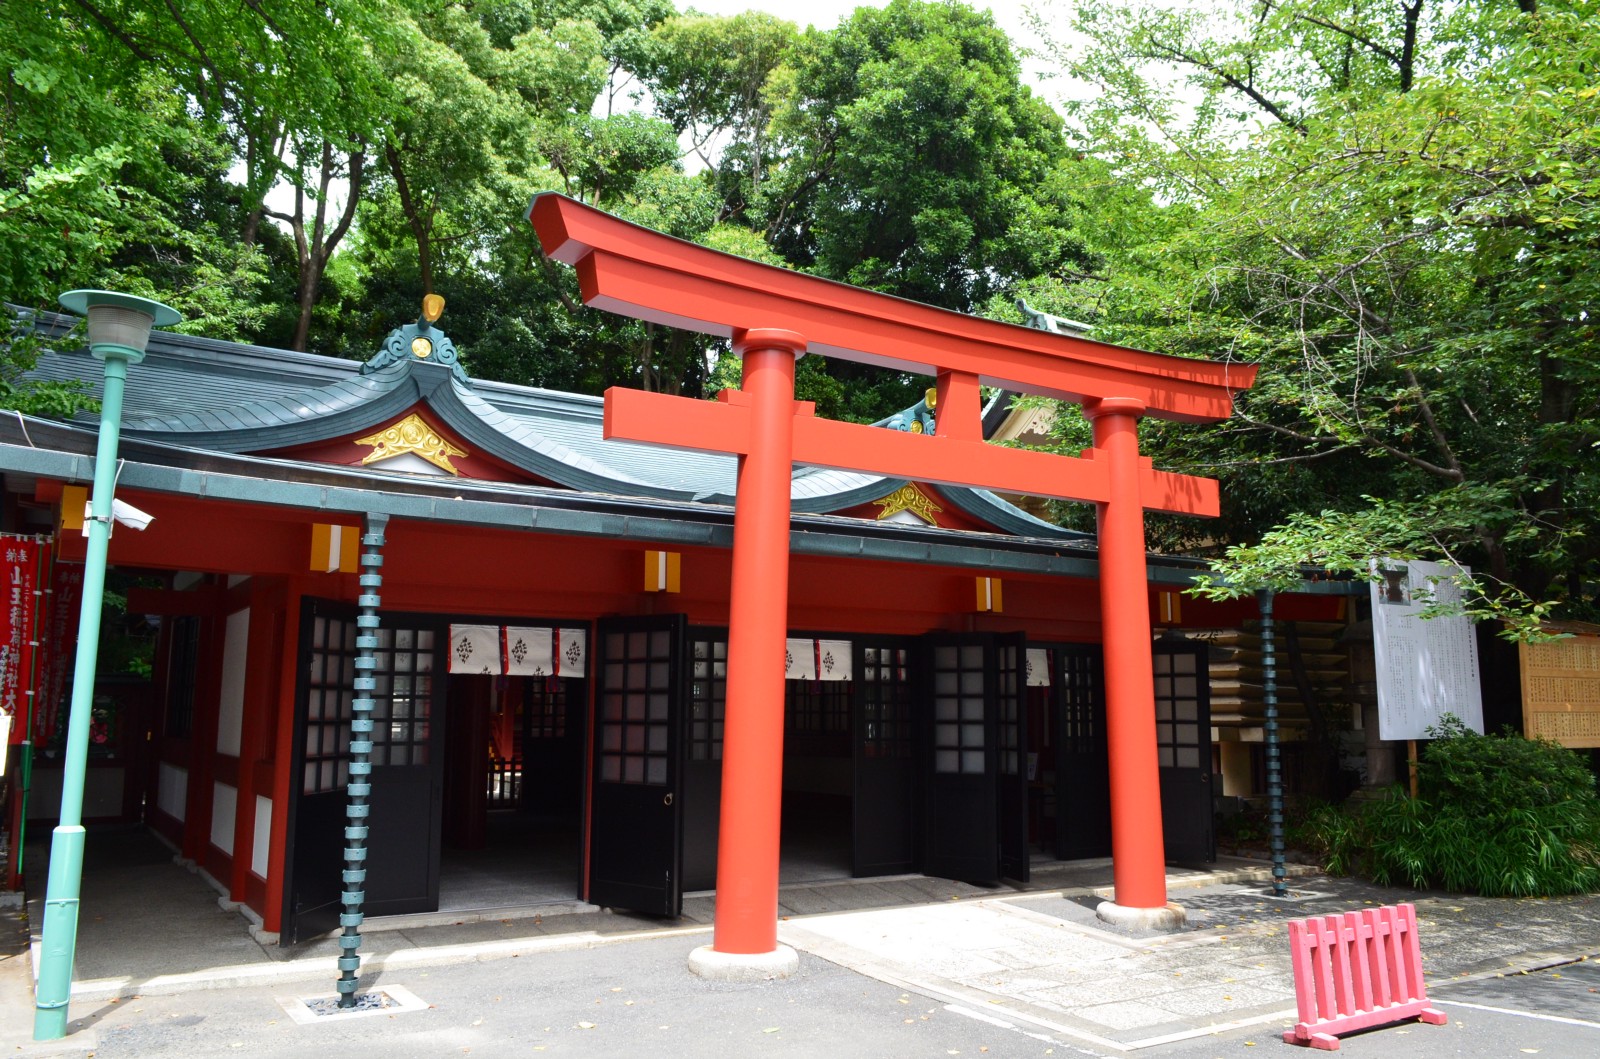 Hie Shrine the Hidden Shrine in Tokyo with Red Torii 